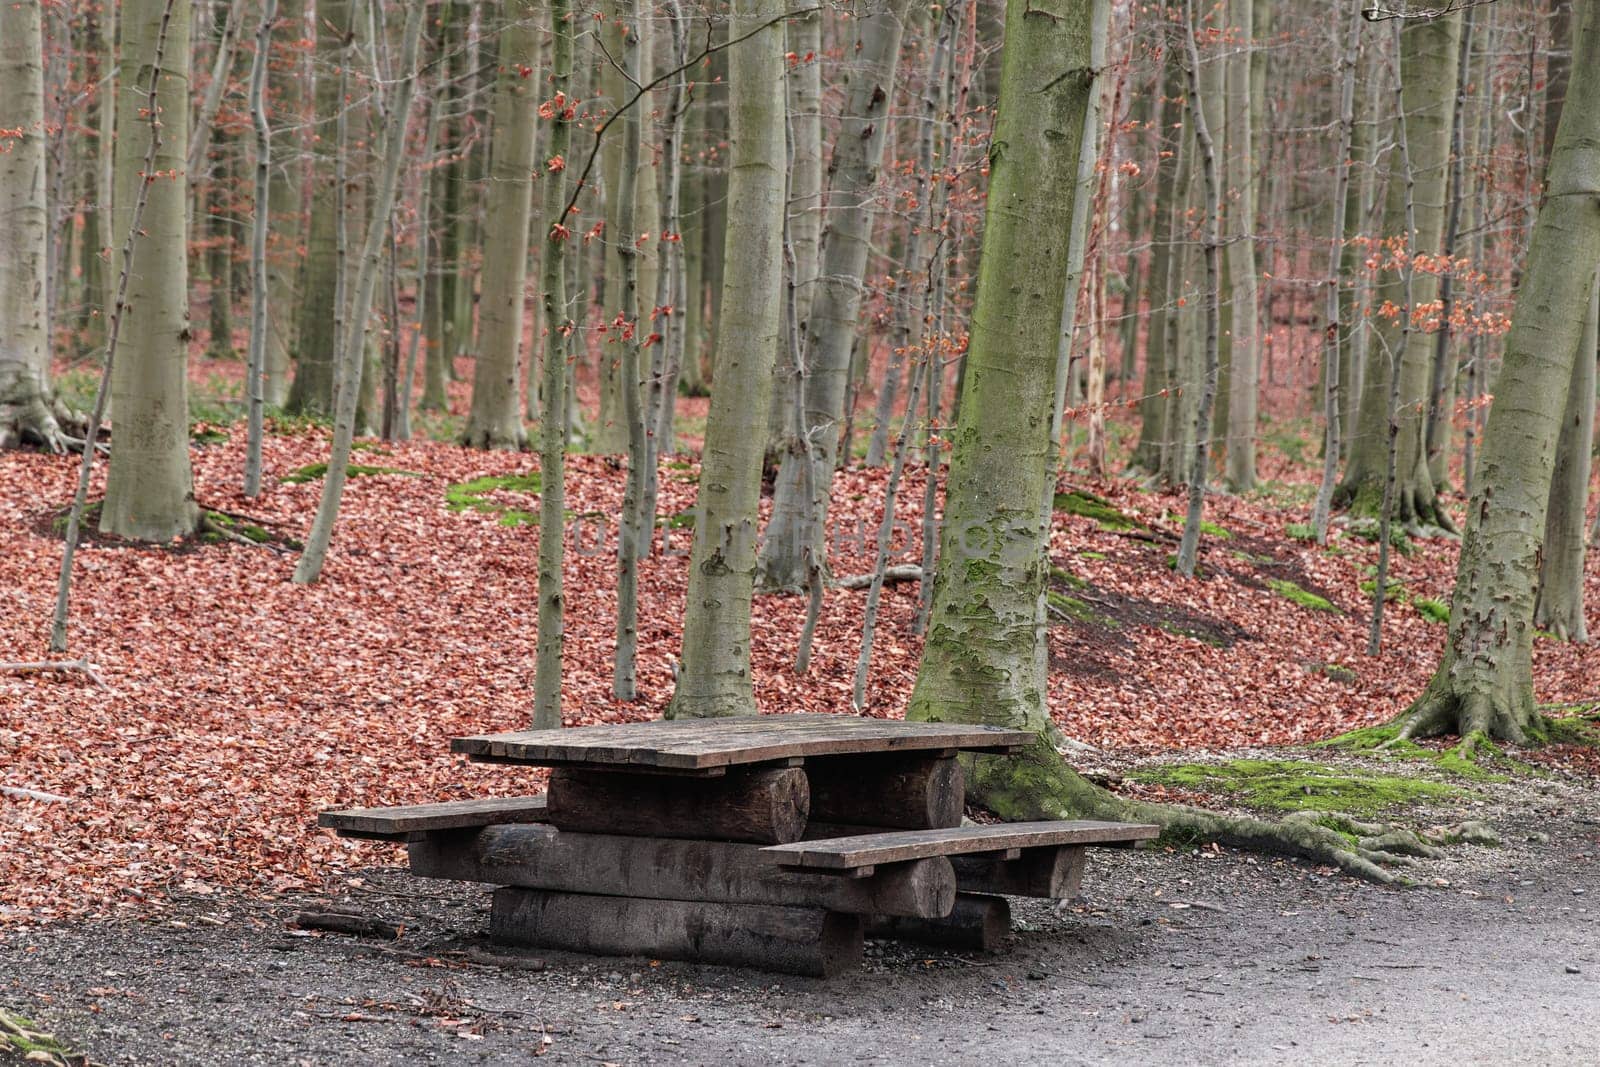 An outdoor wooden picnic table in a forest in autumn